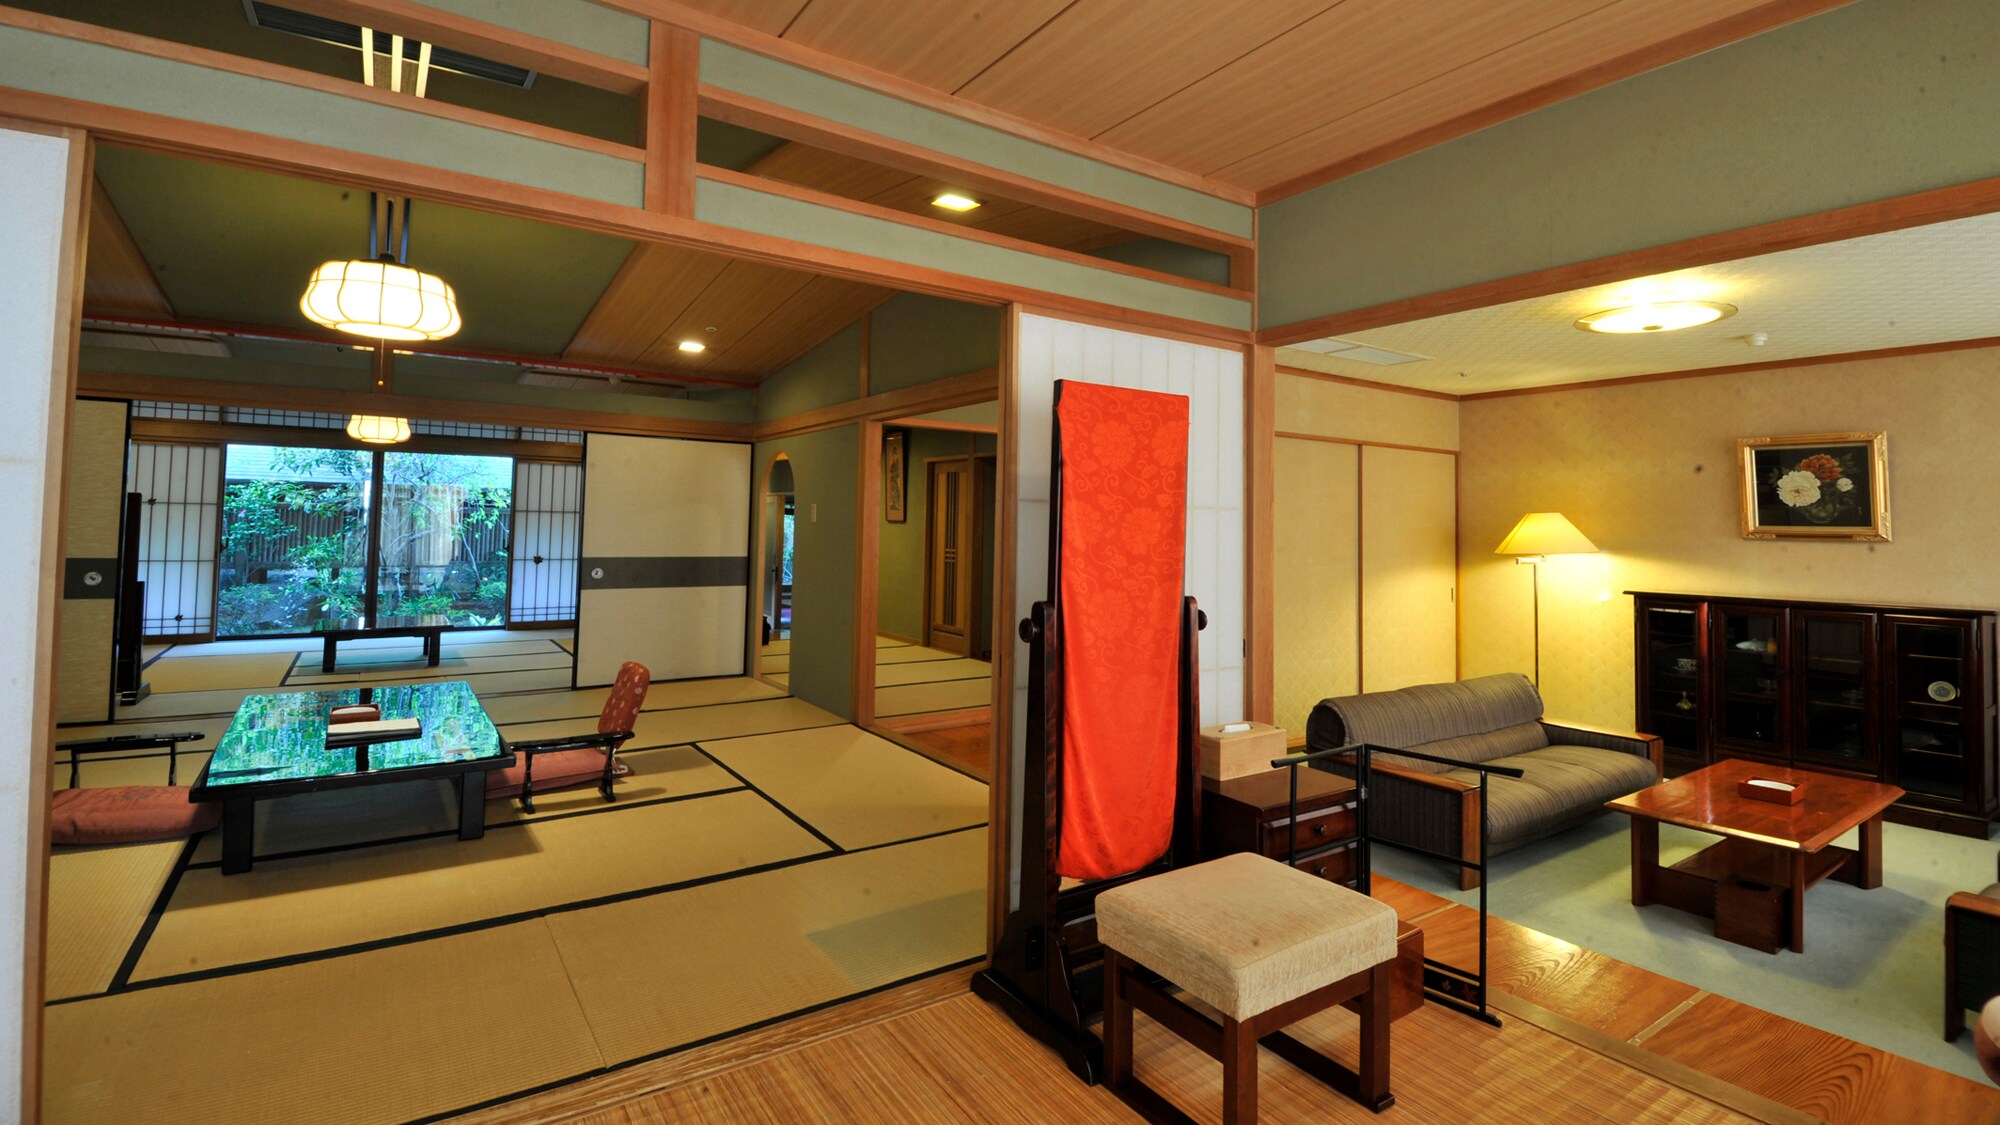 ◆ Special Japanese-style room (example)